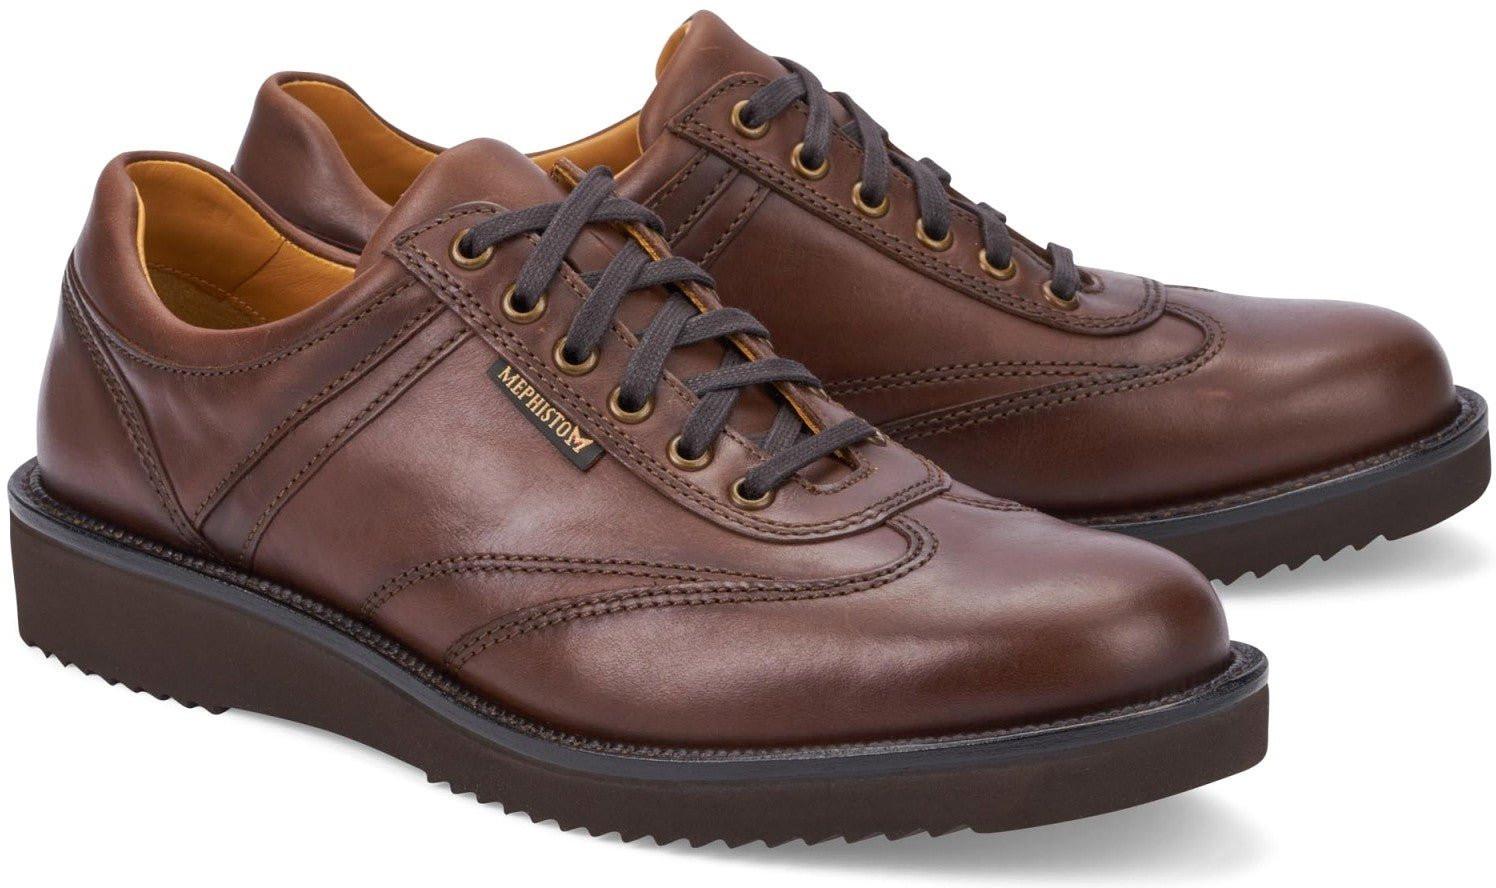 Mephisto  Adriano - Chaussure à lacets cuir 